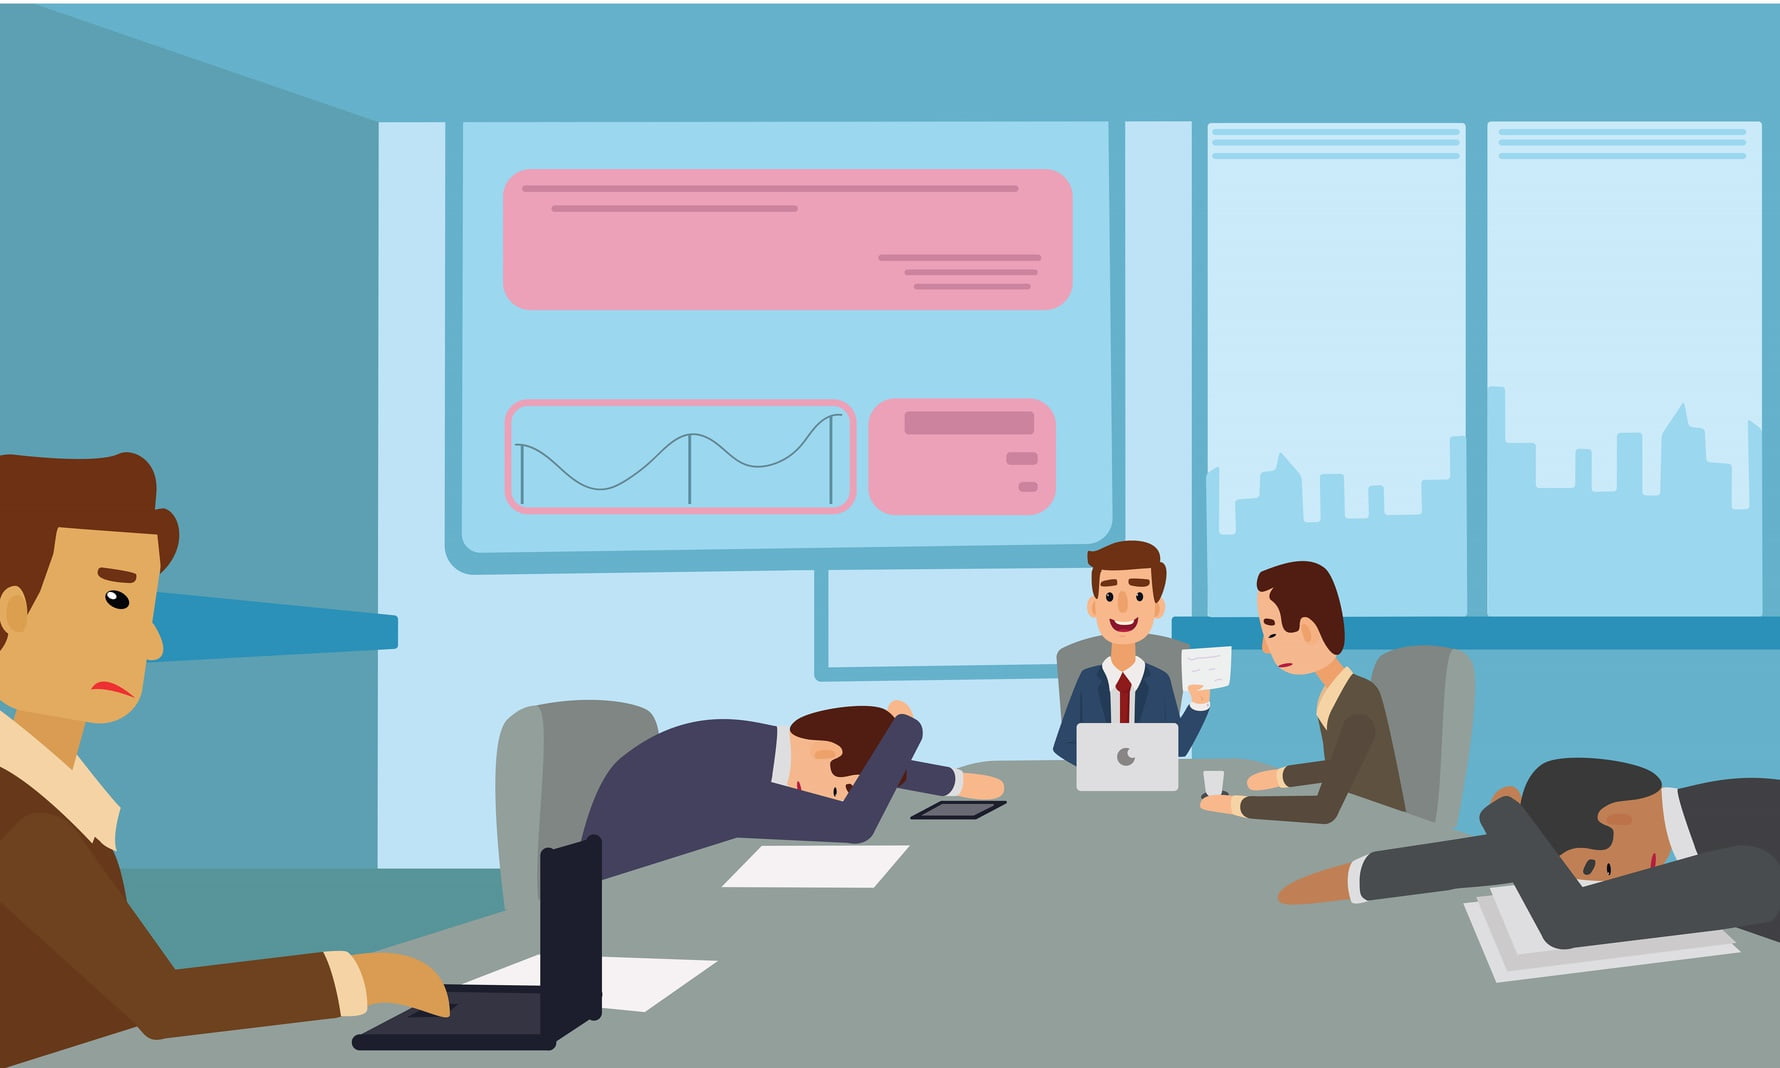 illustrated image of employees sitting at a table working on computer and some with heads down